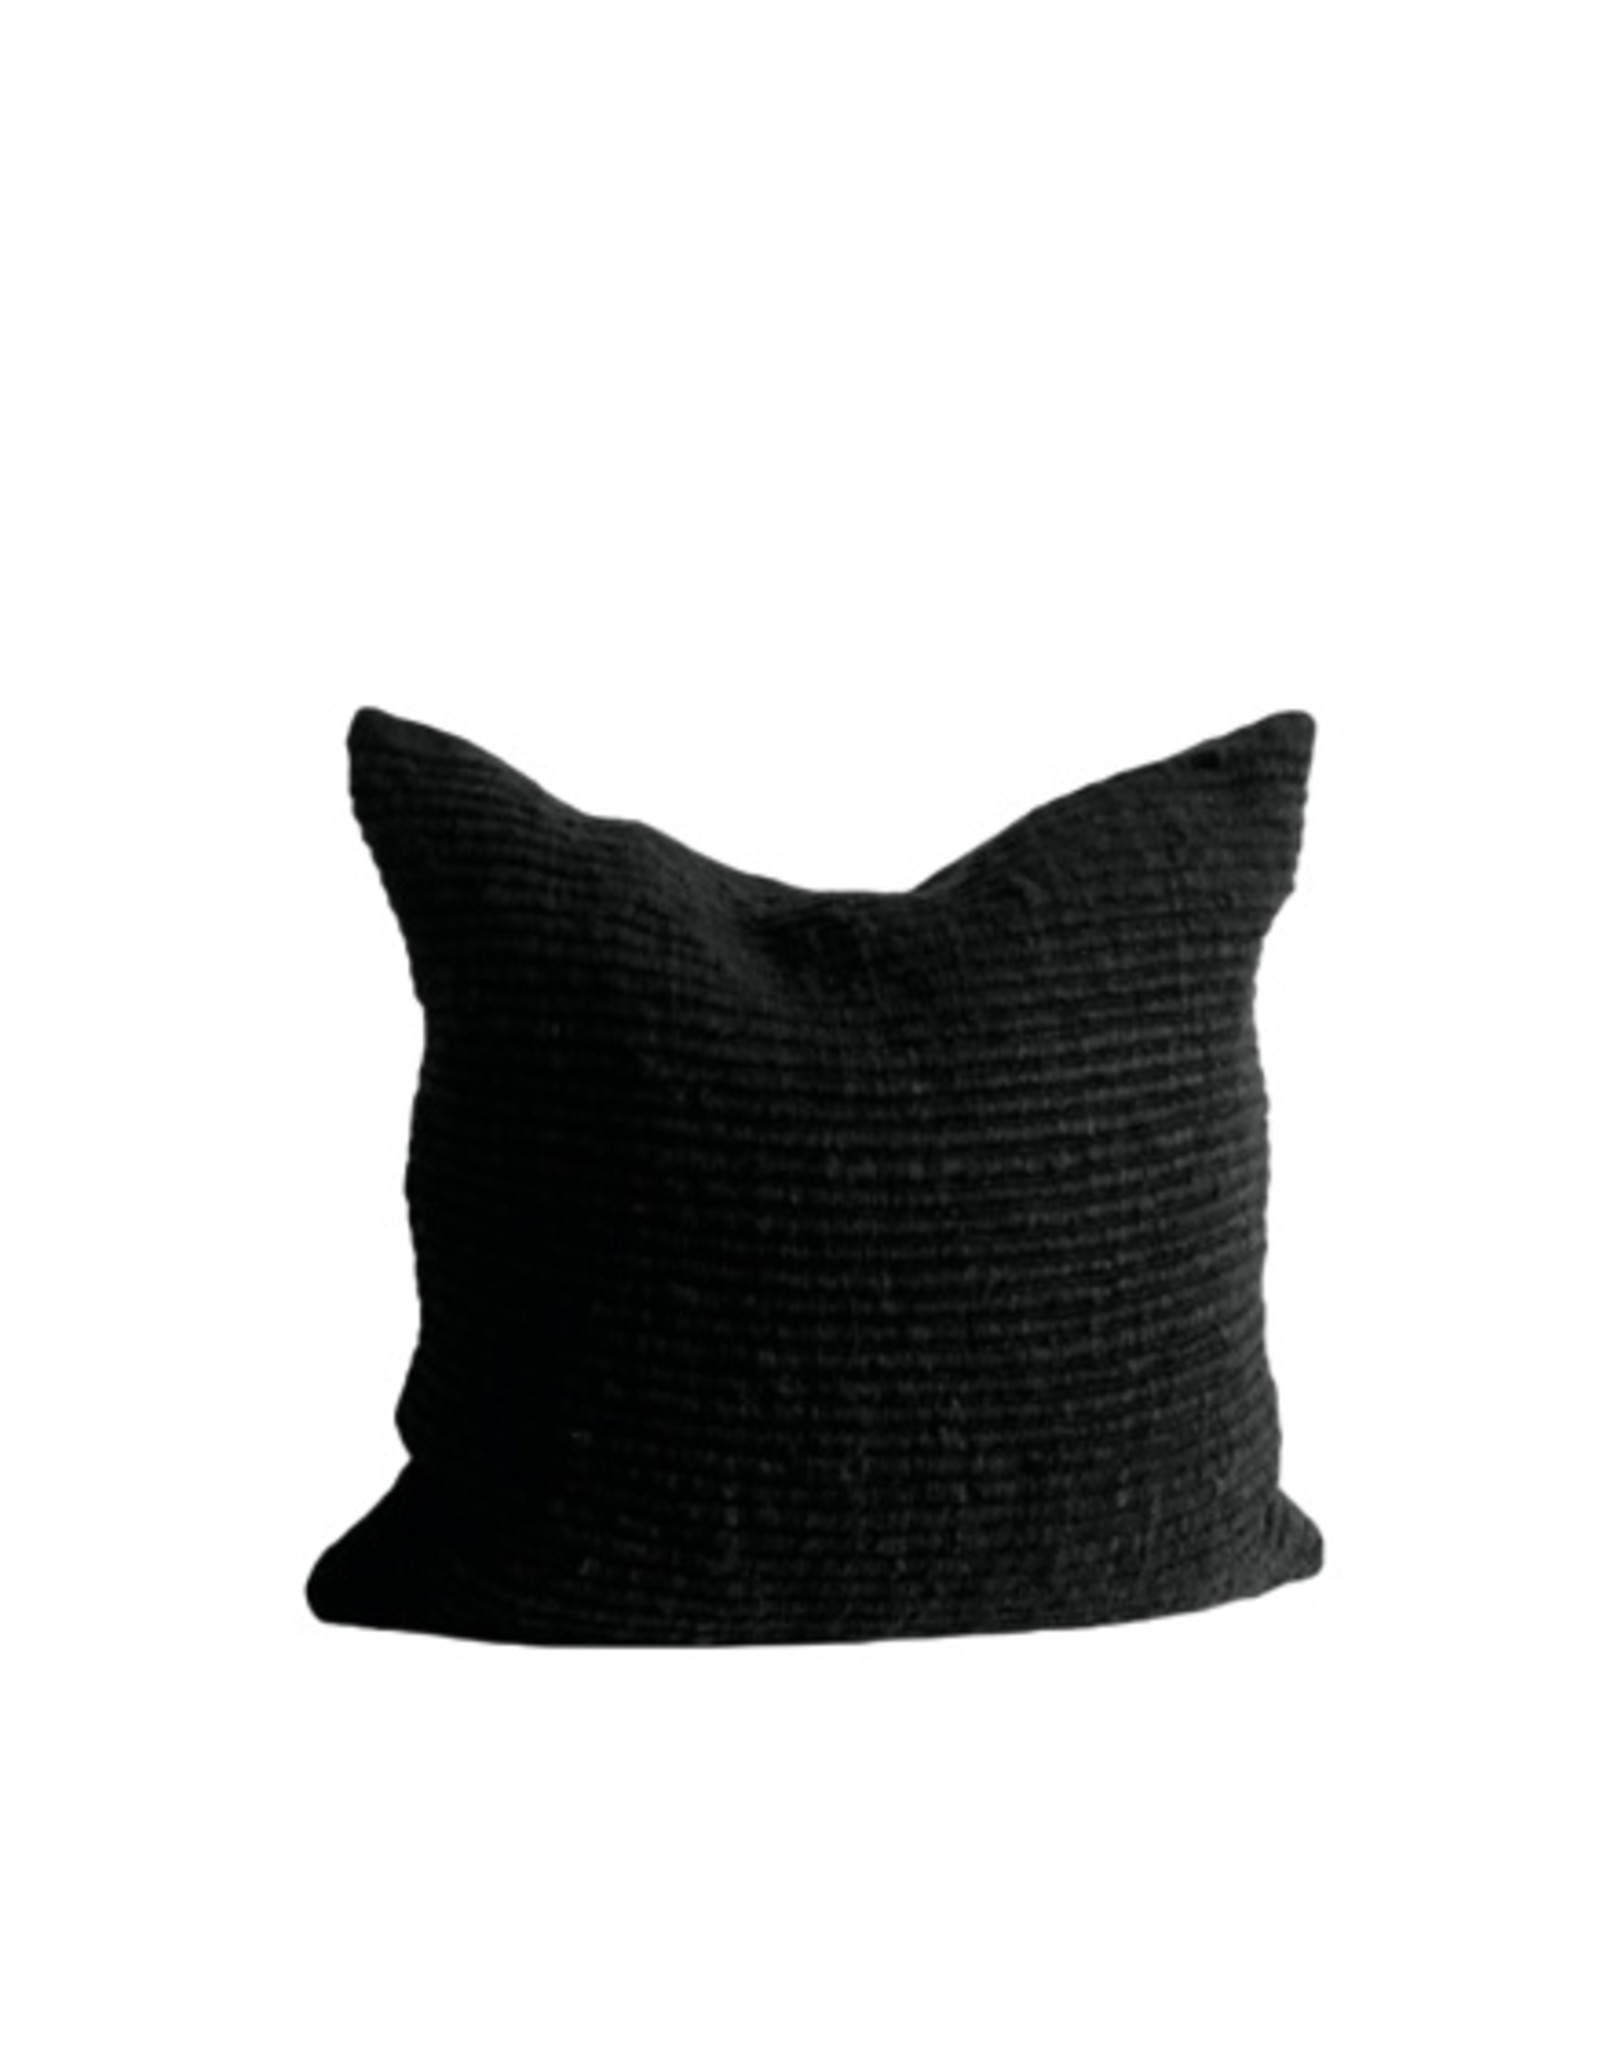 Black Ribbed Textured Pillow, Chile 26 x 26